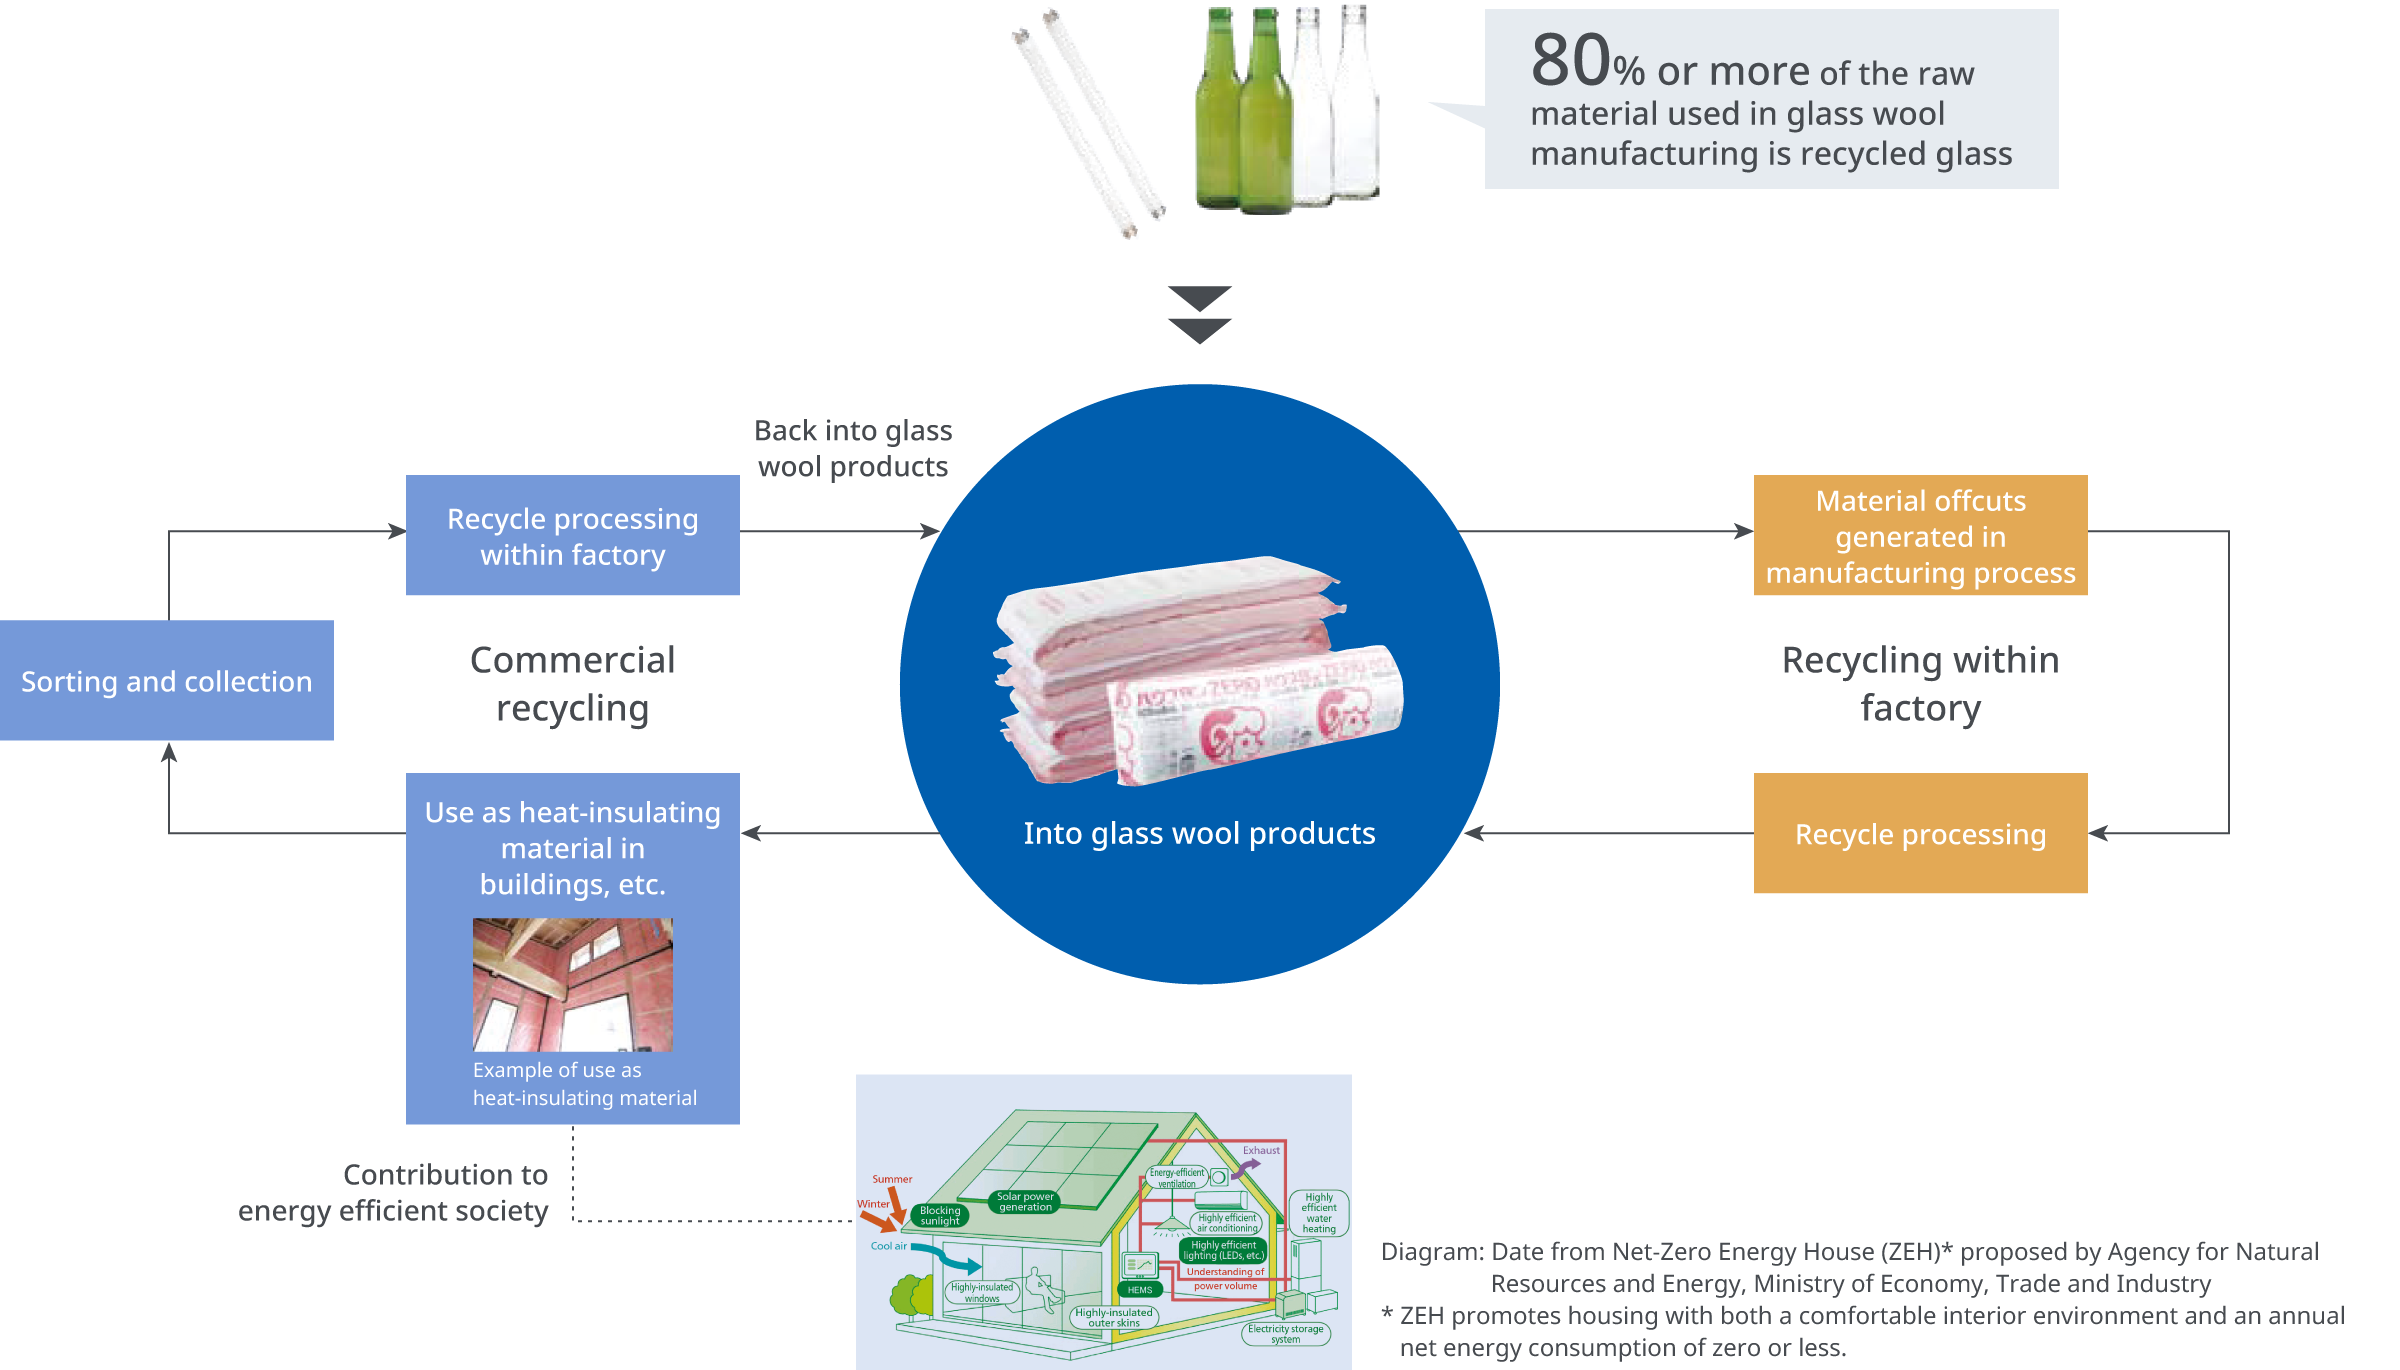 Recycling in the Manufacturing Process